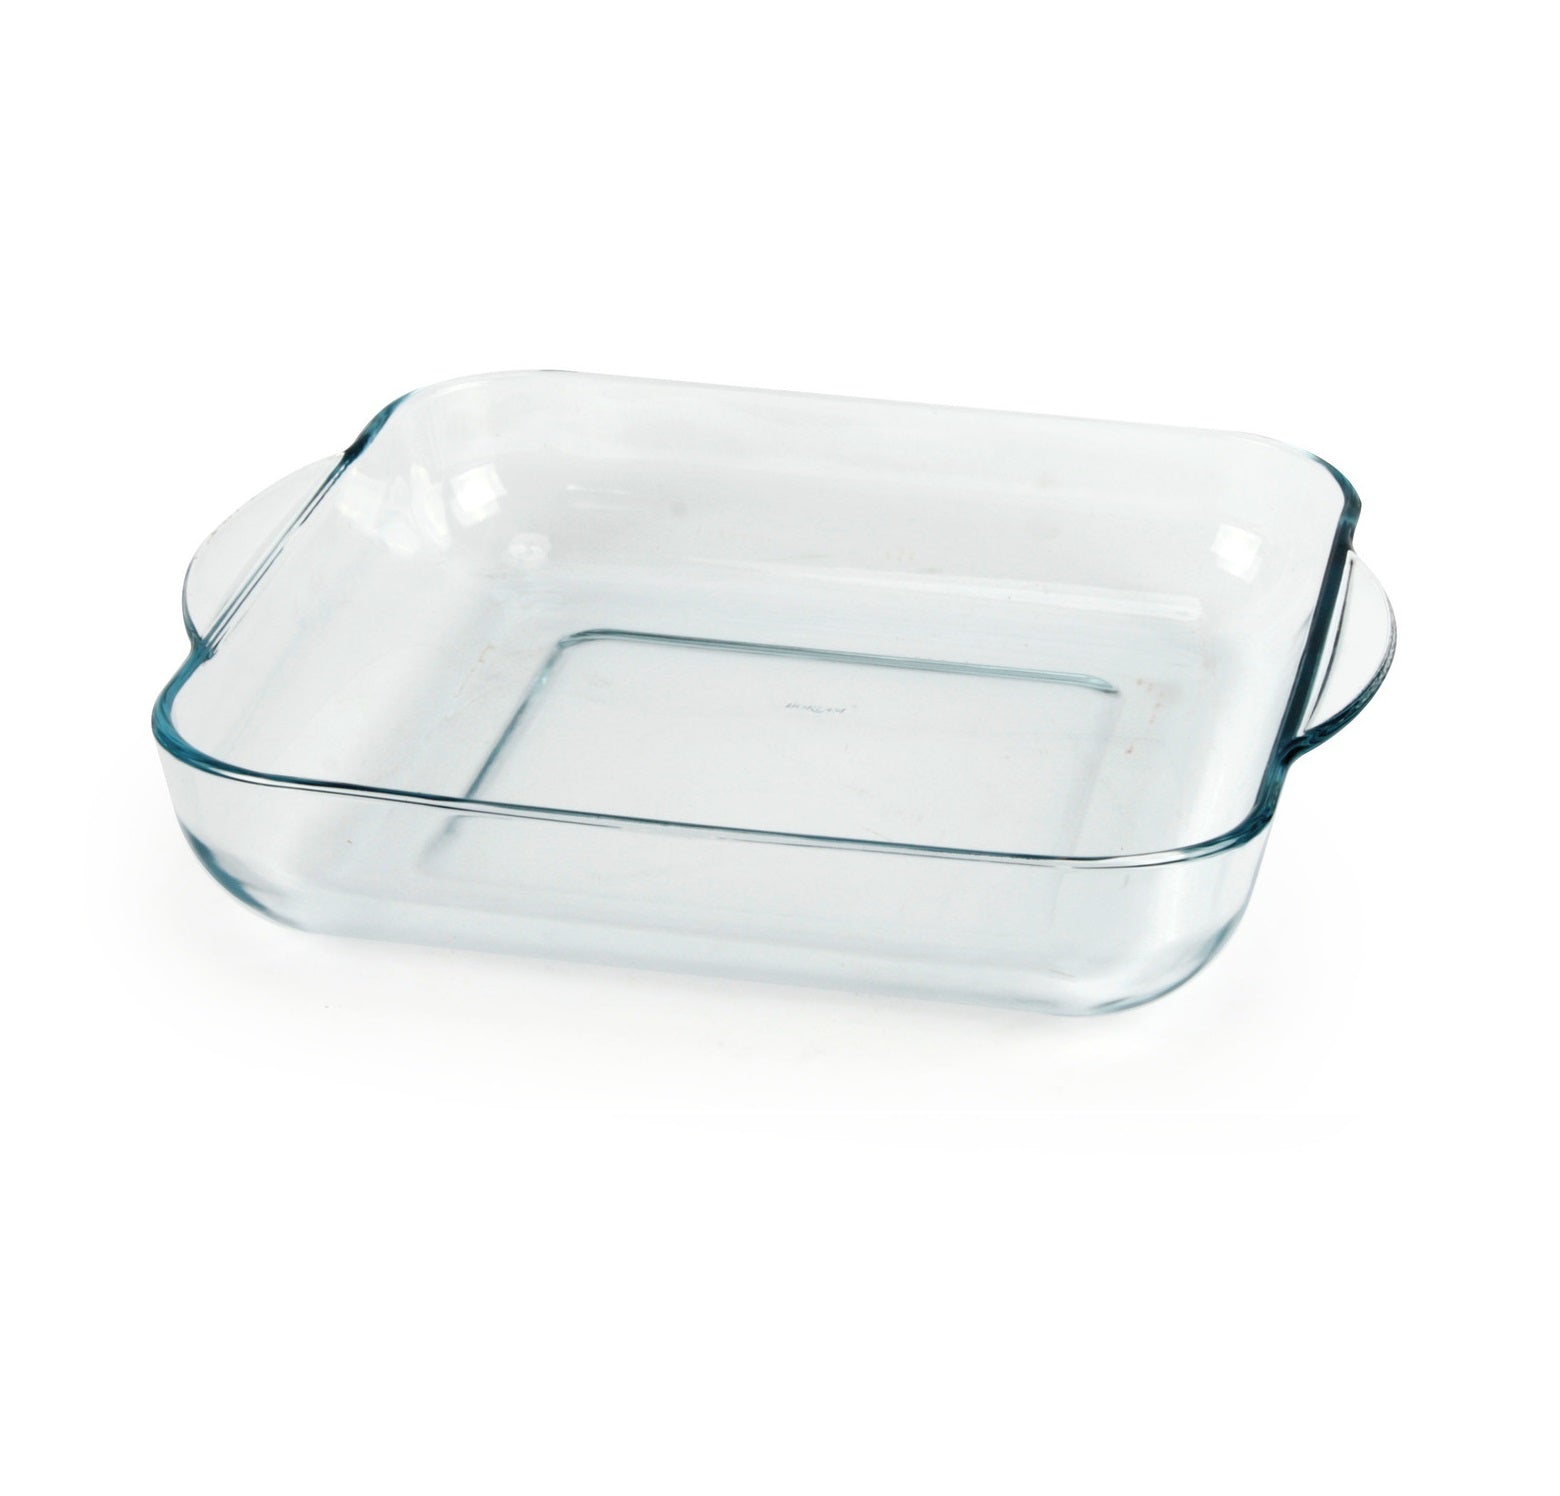 Clear Glass 28X28cm Square Food Pasta Baking Oven Dish Tray